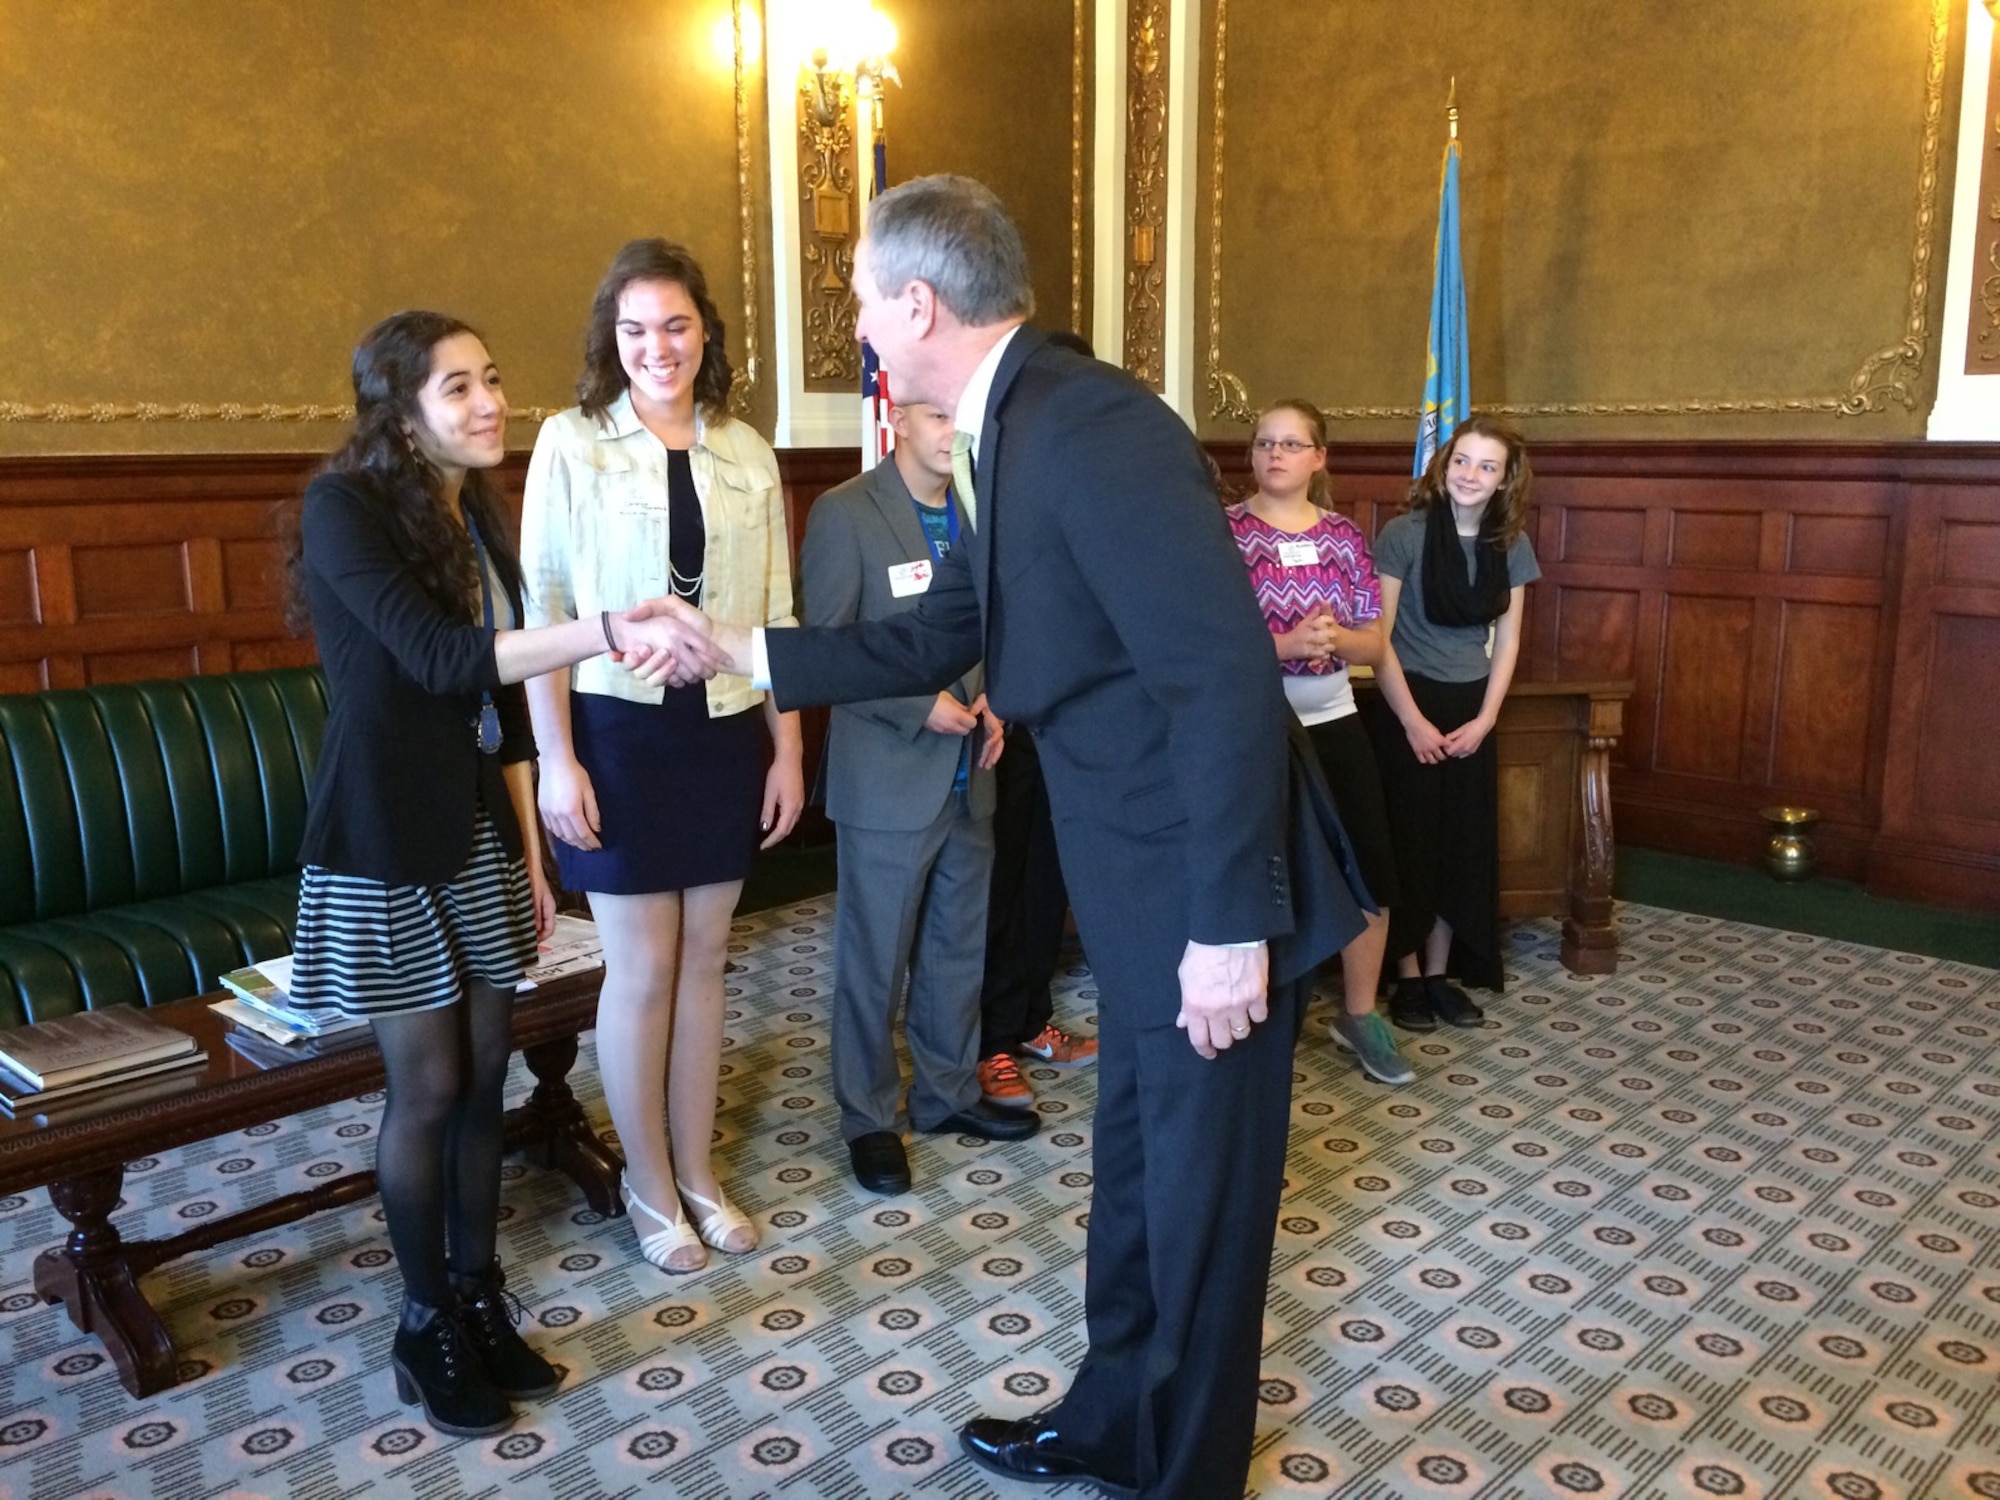 Ria Gualano, daughter of Lan Gualano, 28th Comptroller Squadron quality assurance manager, shakes hands with Dennis Daugaard, South Dakota governor, at Box Elder, S.D., March 21, 2016. The Military Youth of the Year competition is a part of Boys & Girls Clubs of the America's premier youth recognition program for members who promote service to the Club, community, and family; as well as good academic performance, moral character, life goals, poise and public speaking ability. (Courtesy photo by Lan Gualano/Released)